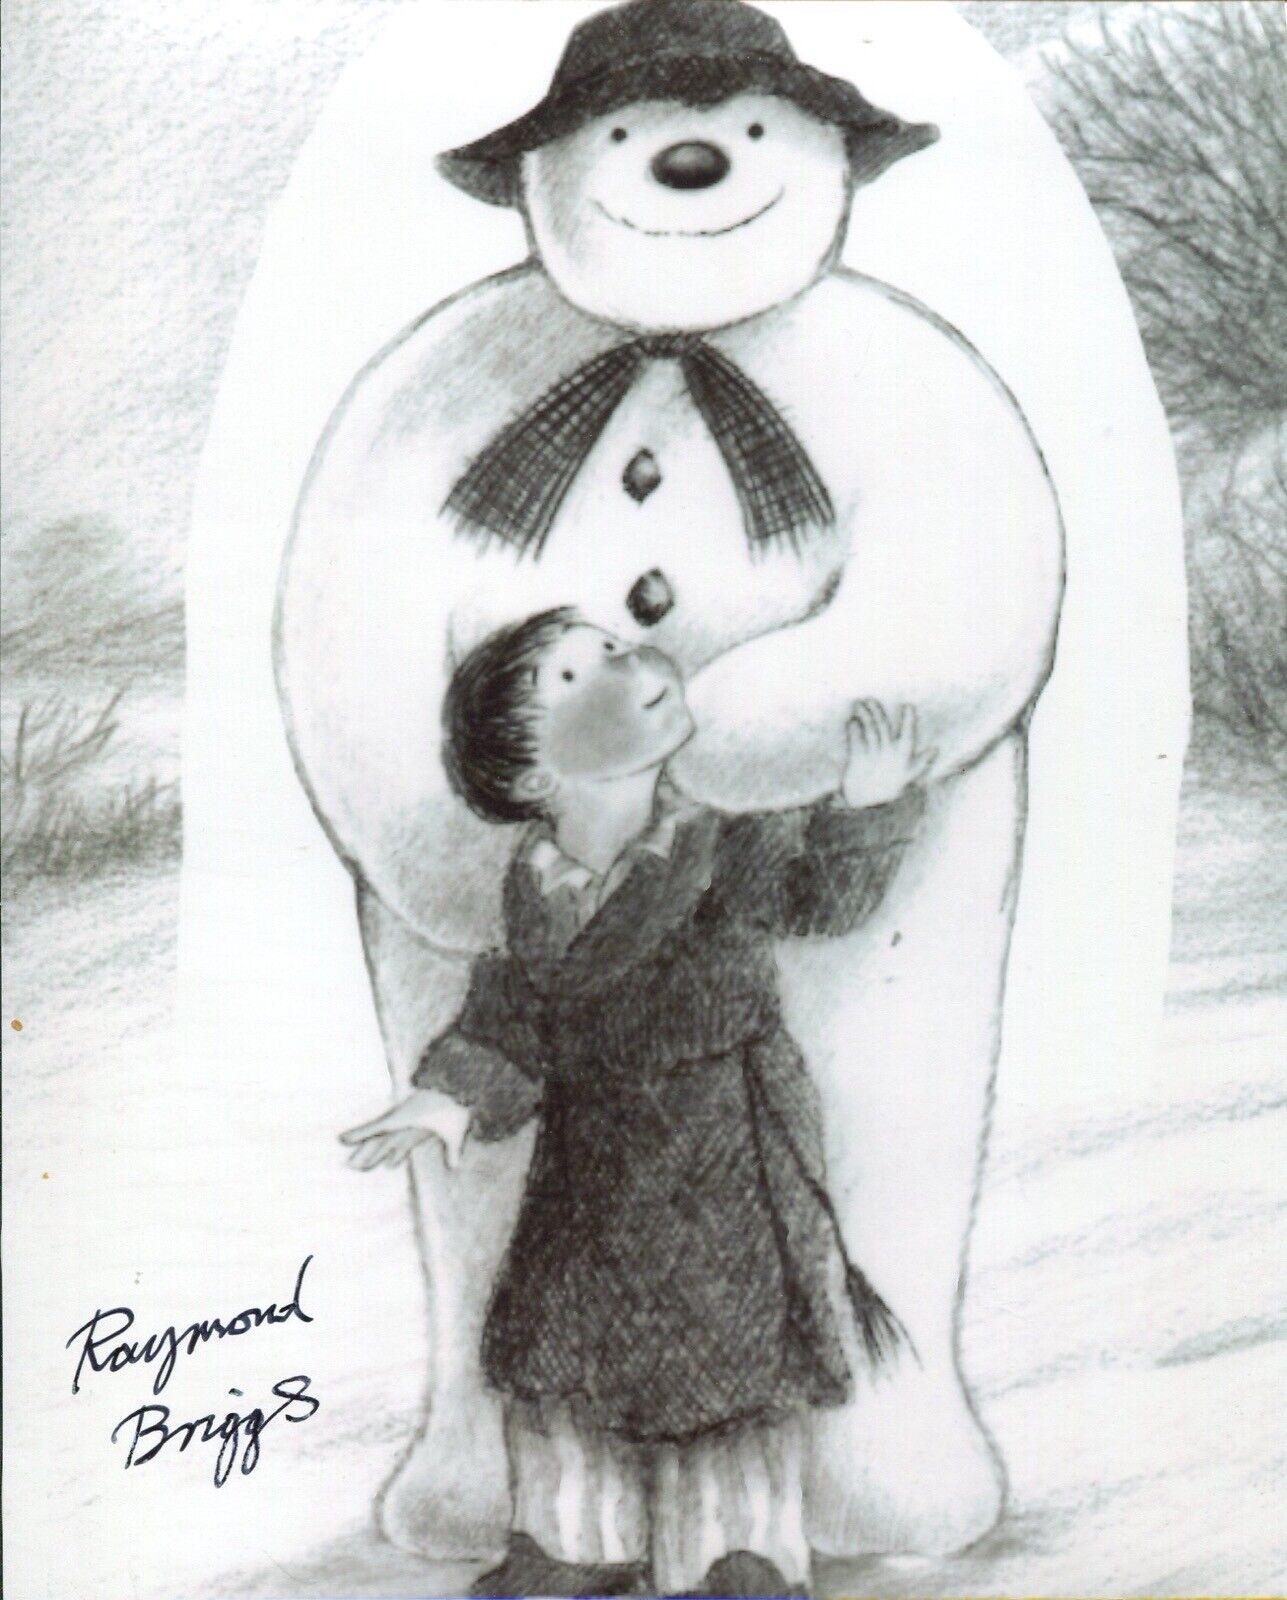 Raymond Briggs signed The Snowman Christmas movie Photo Poster painting - UACC DEALER